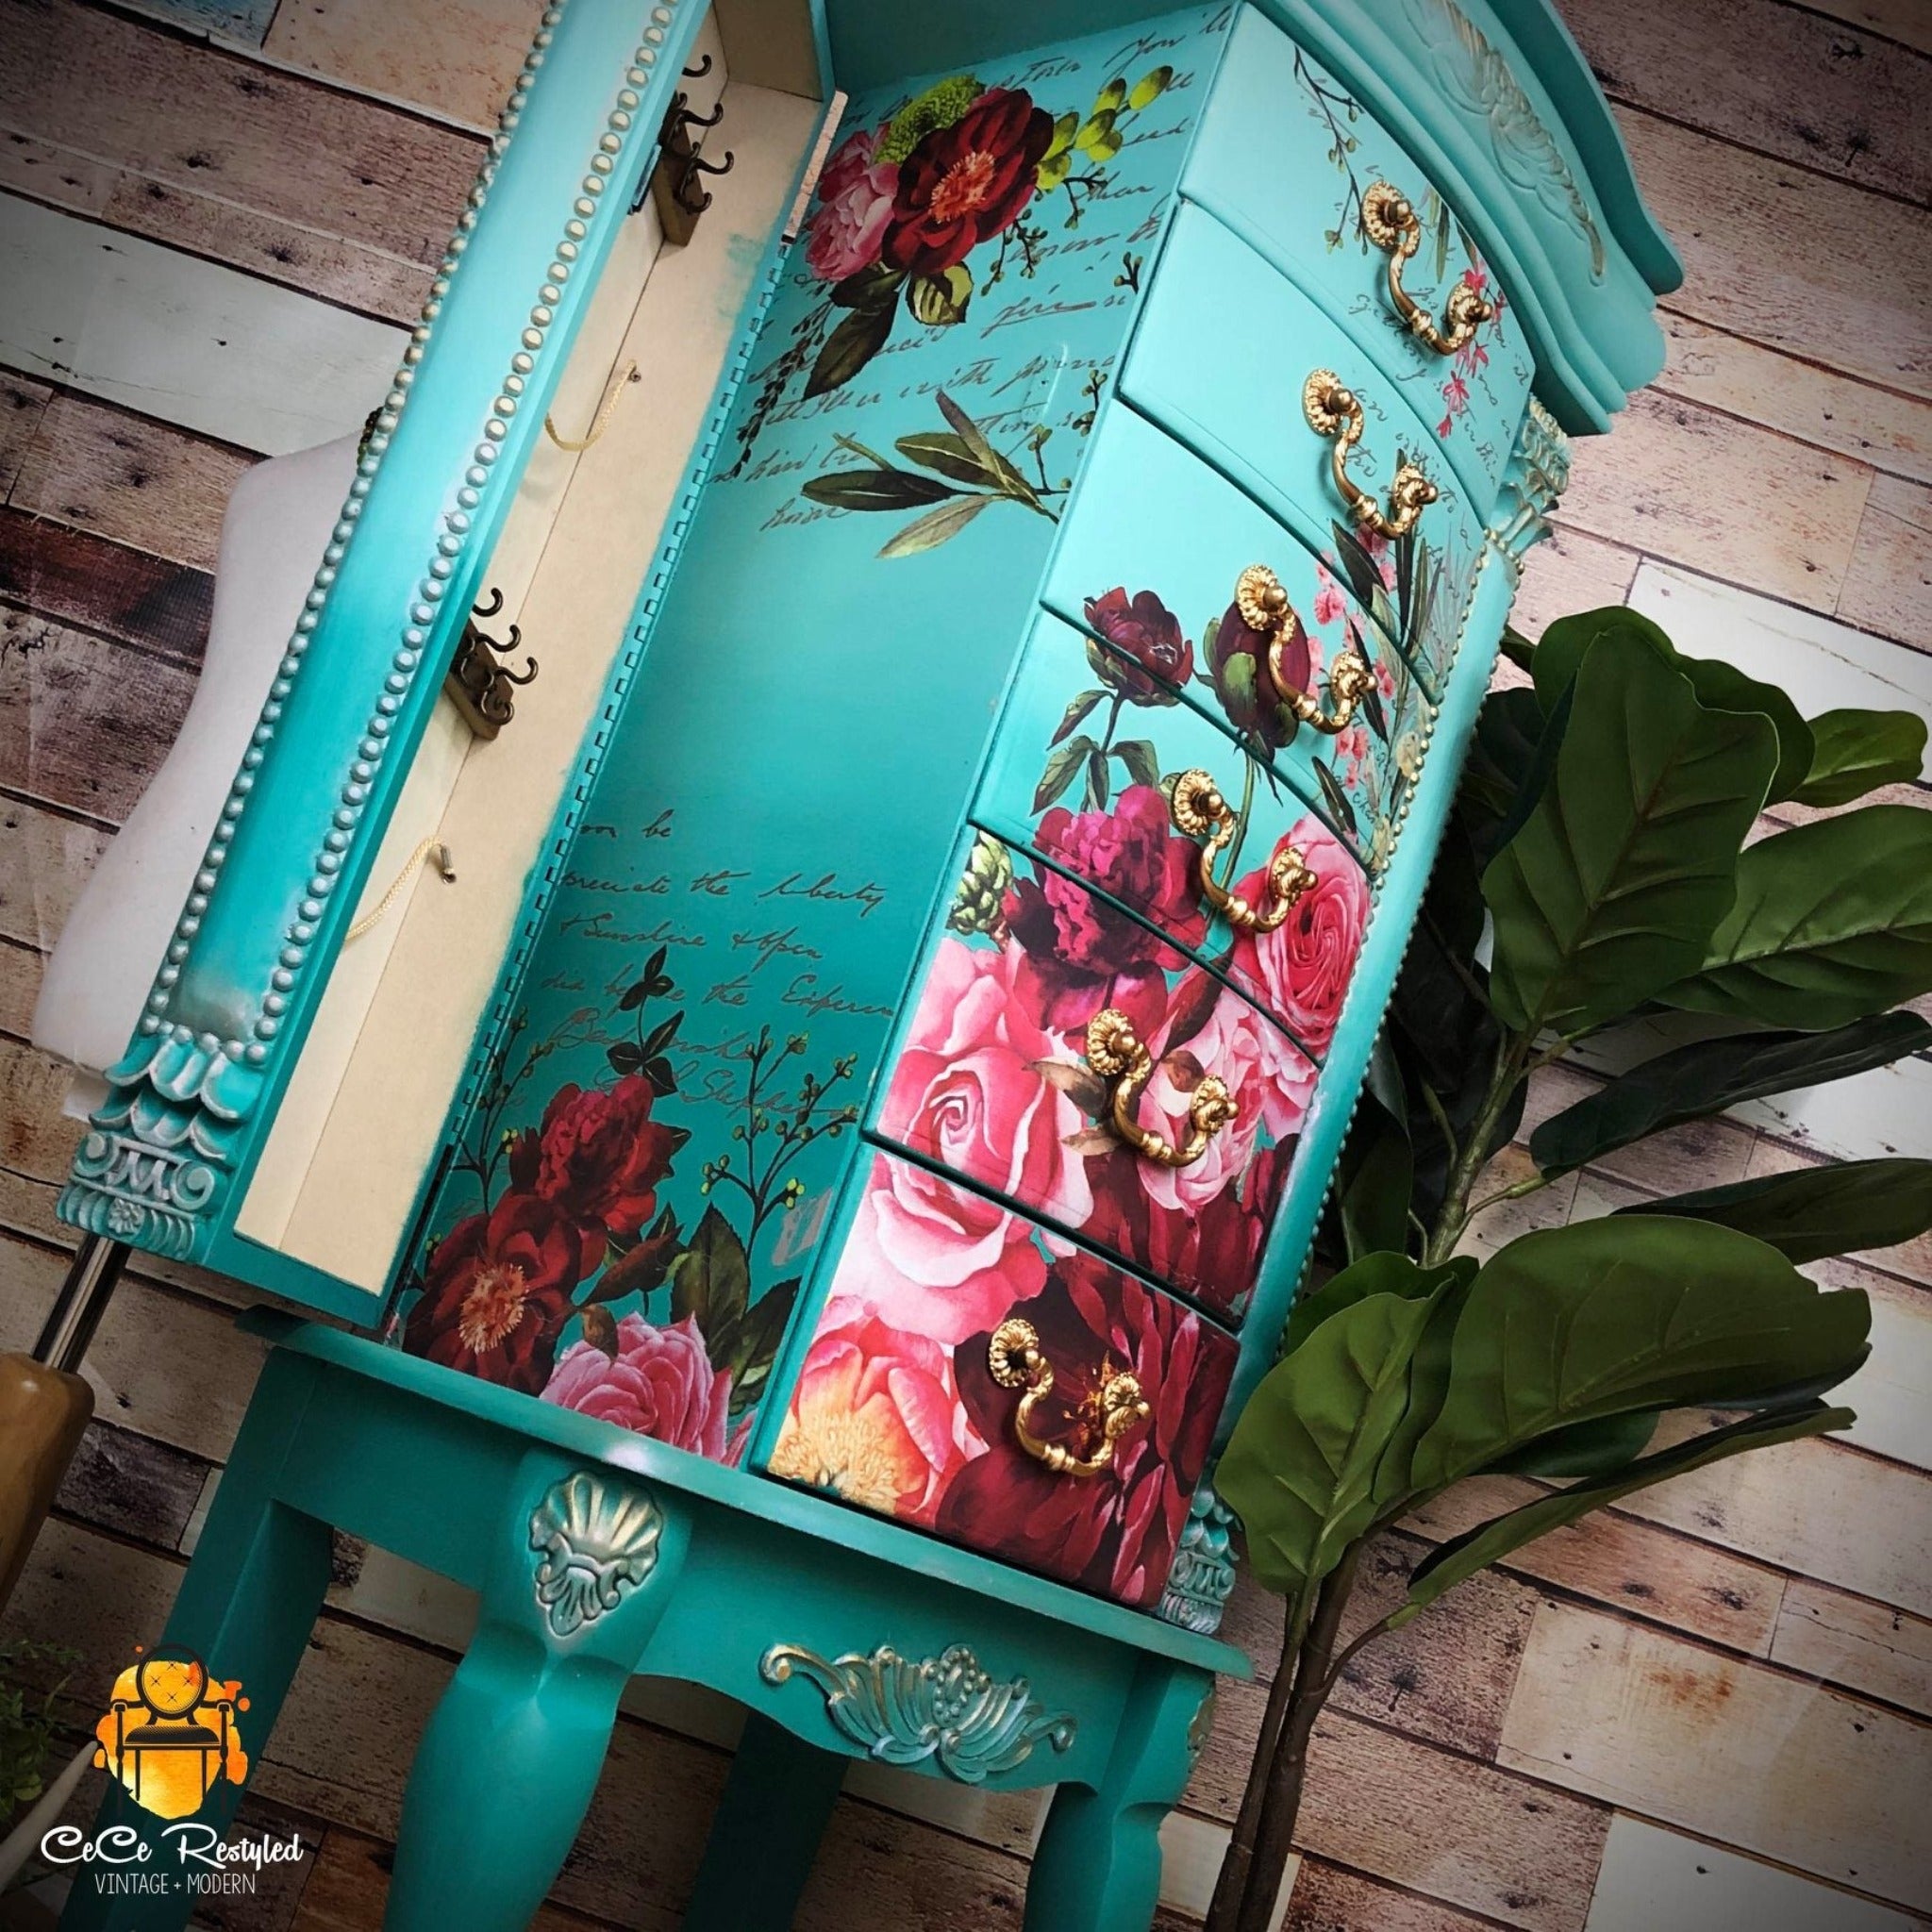 A vintage standing jewelry armoire refurbished by CeCe ReStyled is painted an ombre of light teal down to dark teal with gold accents and features ReDesign with Prima's Royal Burgundy transfer on its front drawers and inside its side door.